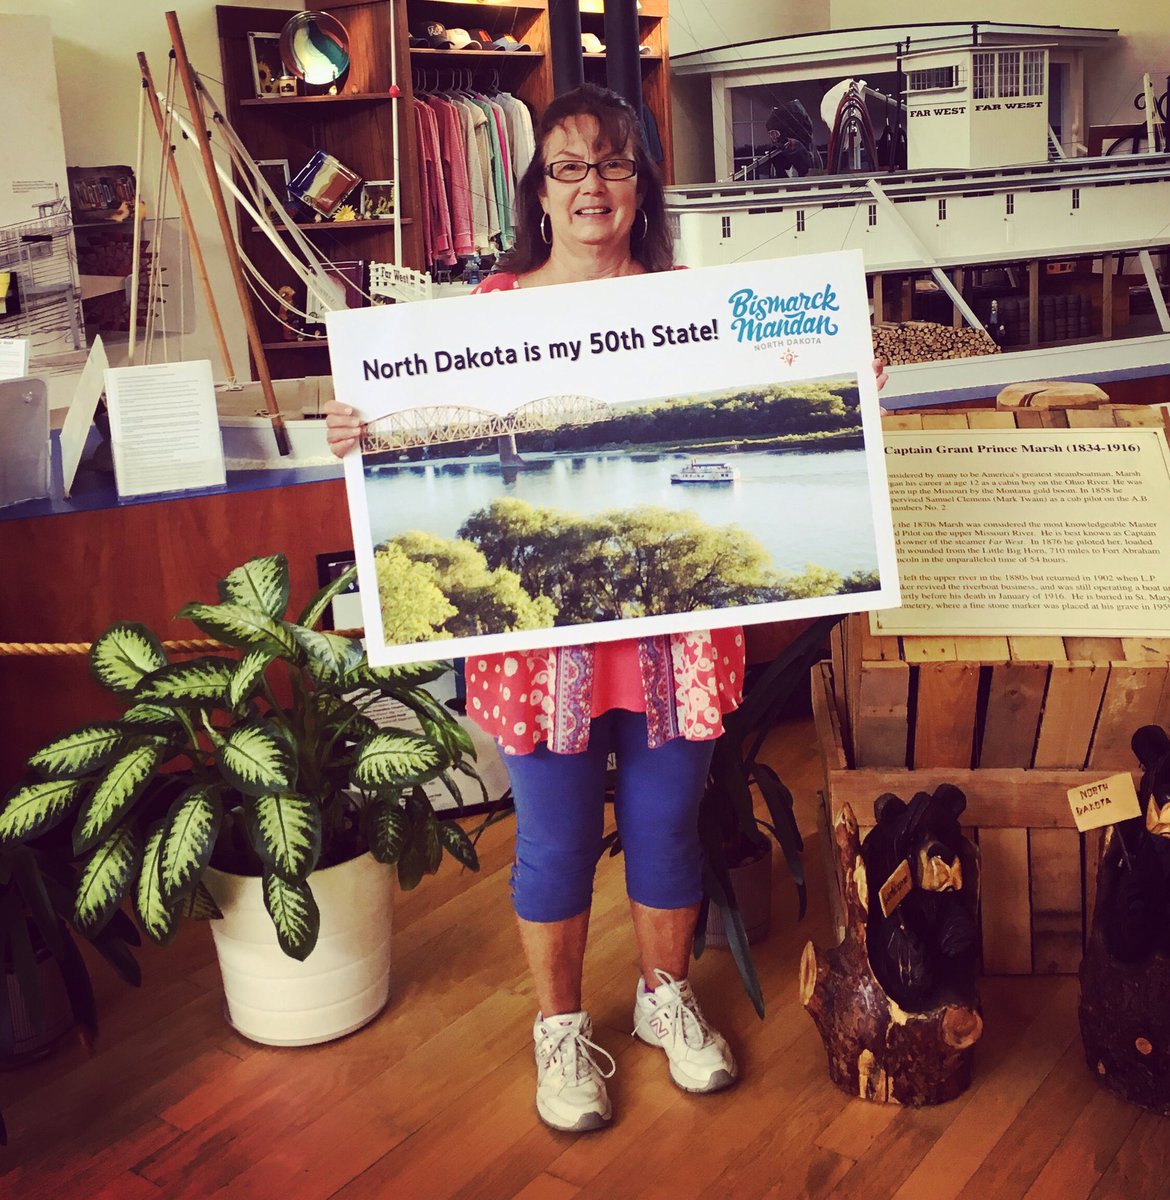 Linda from Desloge, MO visited us recently and told us that #northdakota was her #50thstate to visit! Congratulations, Linda! We hope that you had a wonderful time! #noboundariesnd #ilovebisman